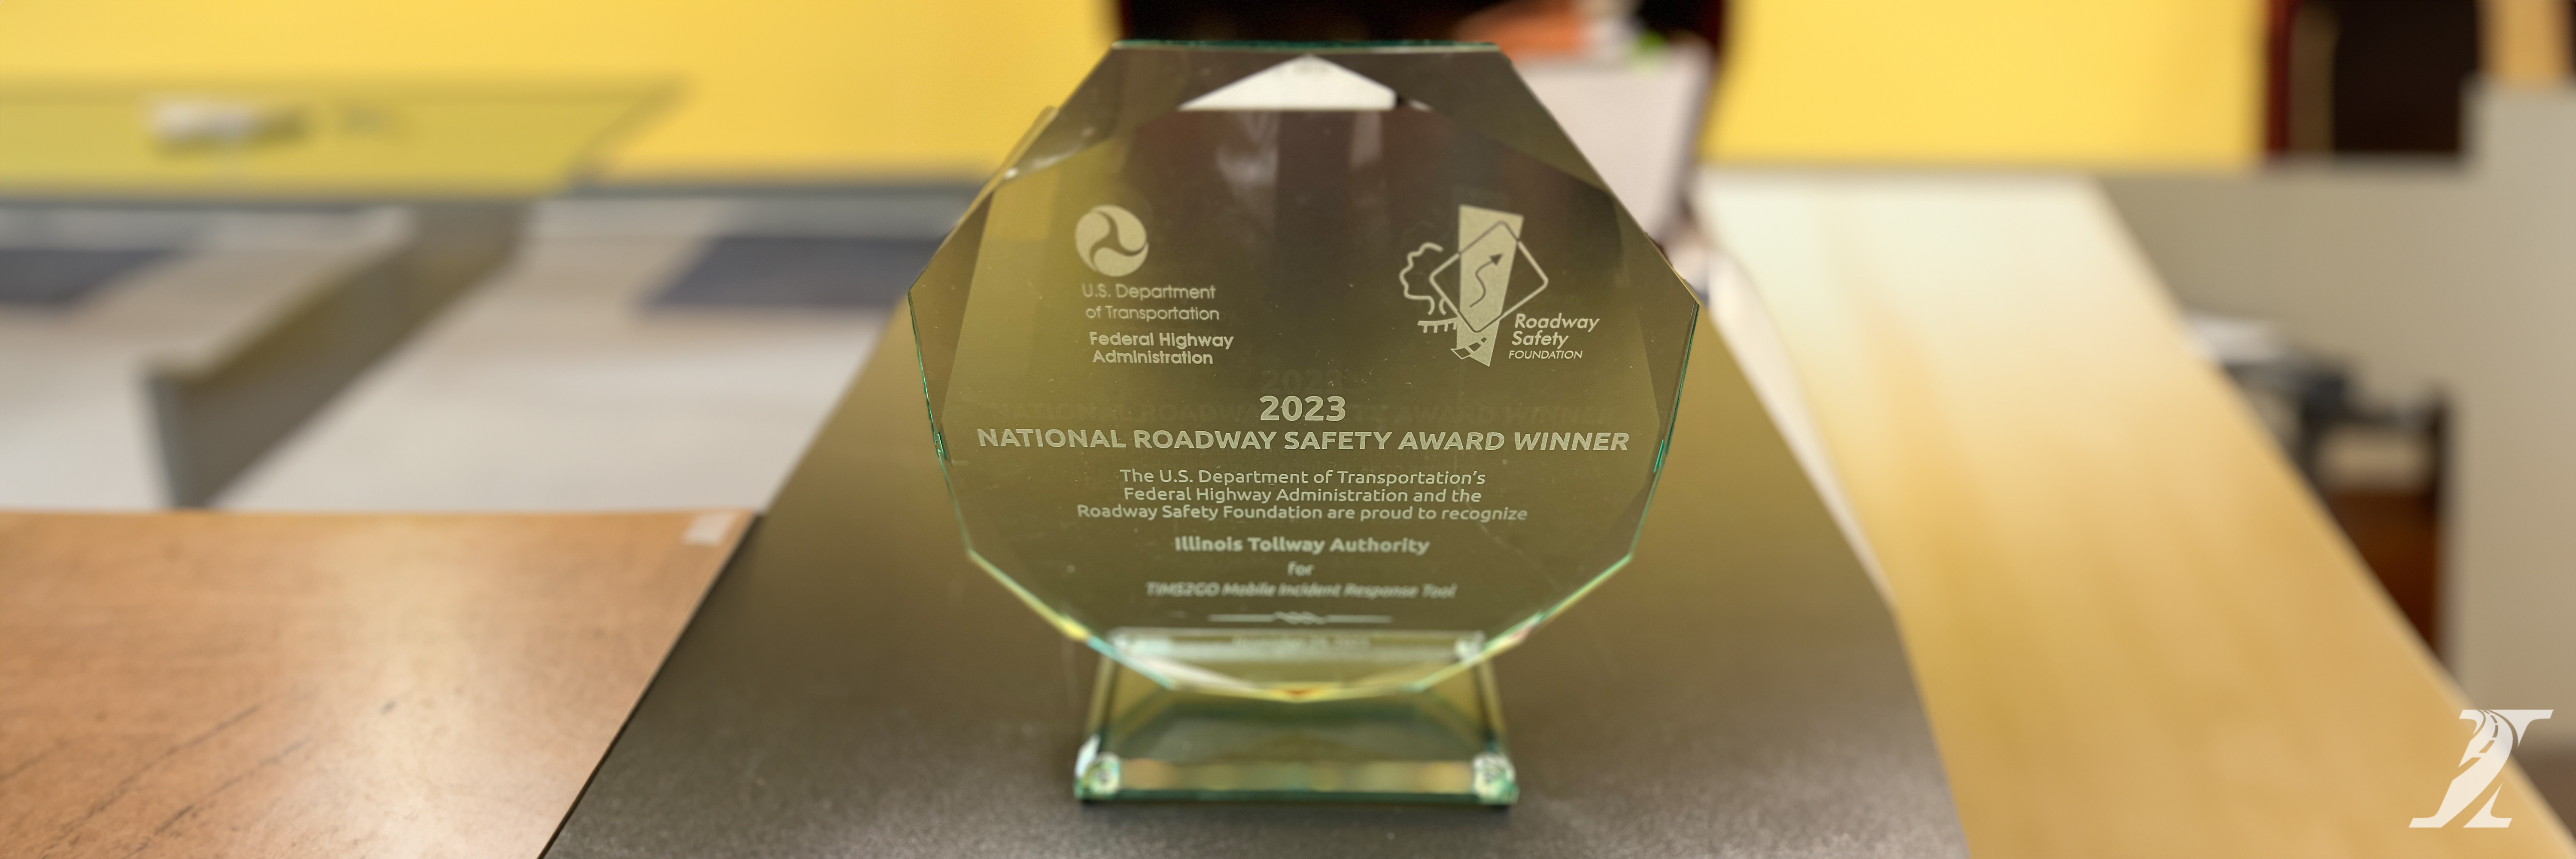 Illinois Tollway Honored for Creating the TIMS2GO Mobile Incident Response Tool